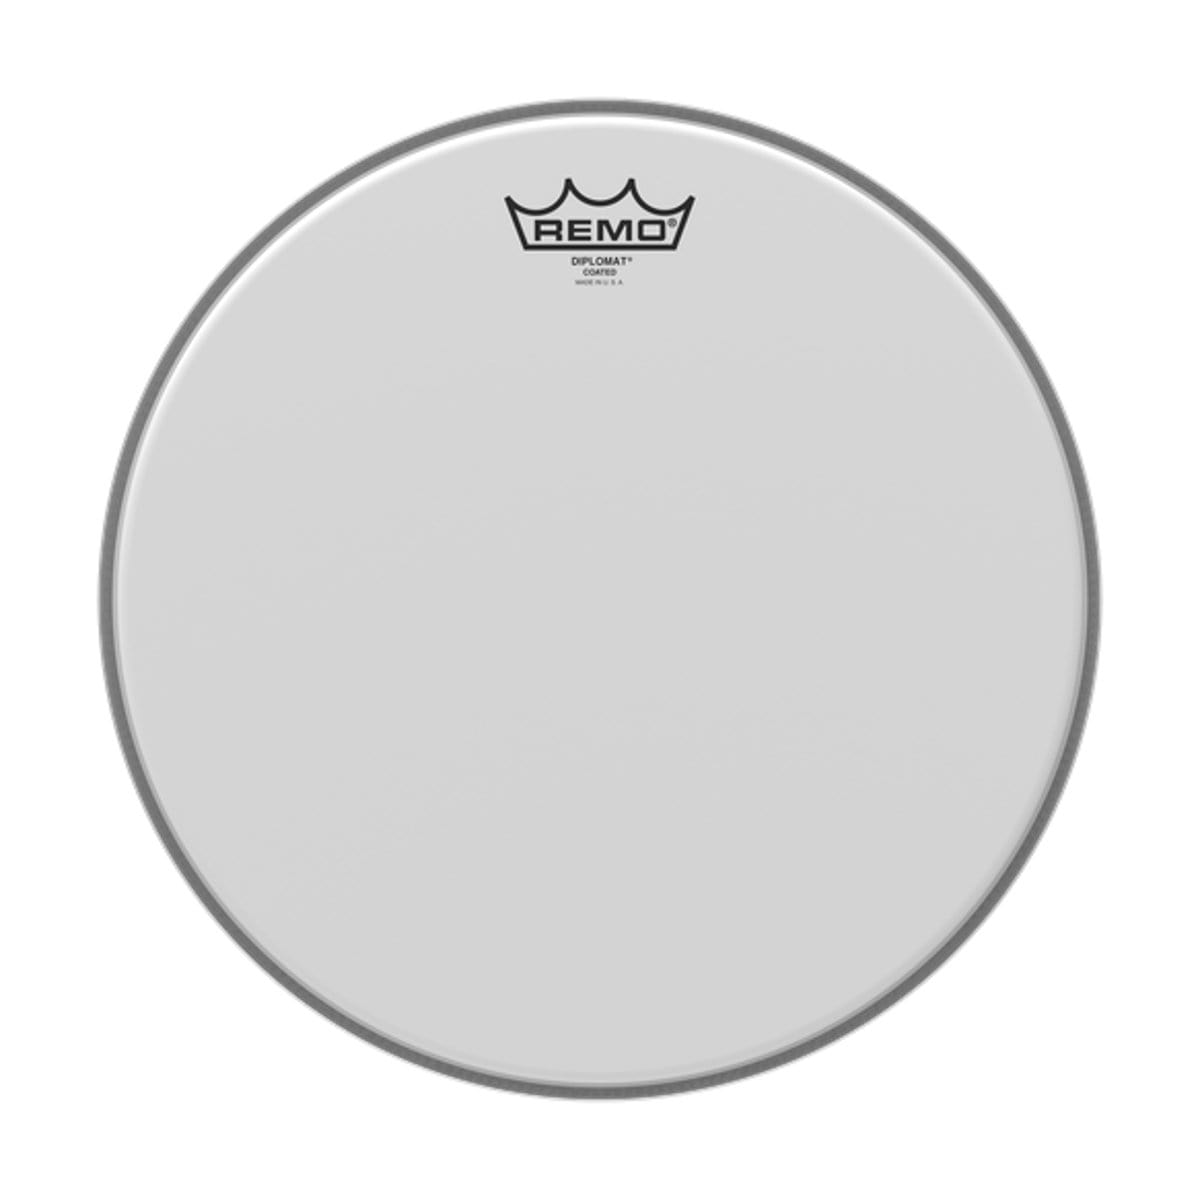 Remo Percussion Remo 13 Inch Drum Head Diplomat Coated BD-0113-00 - Byron Music